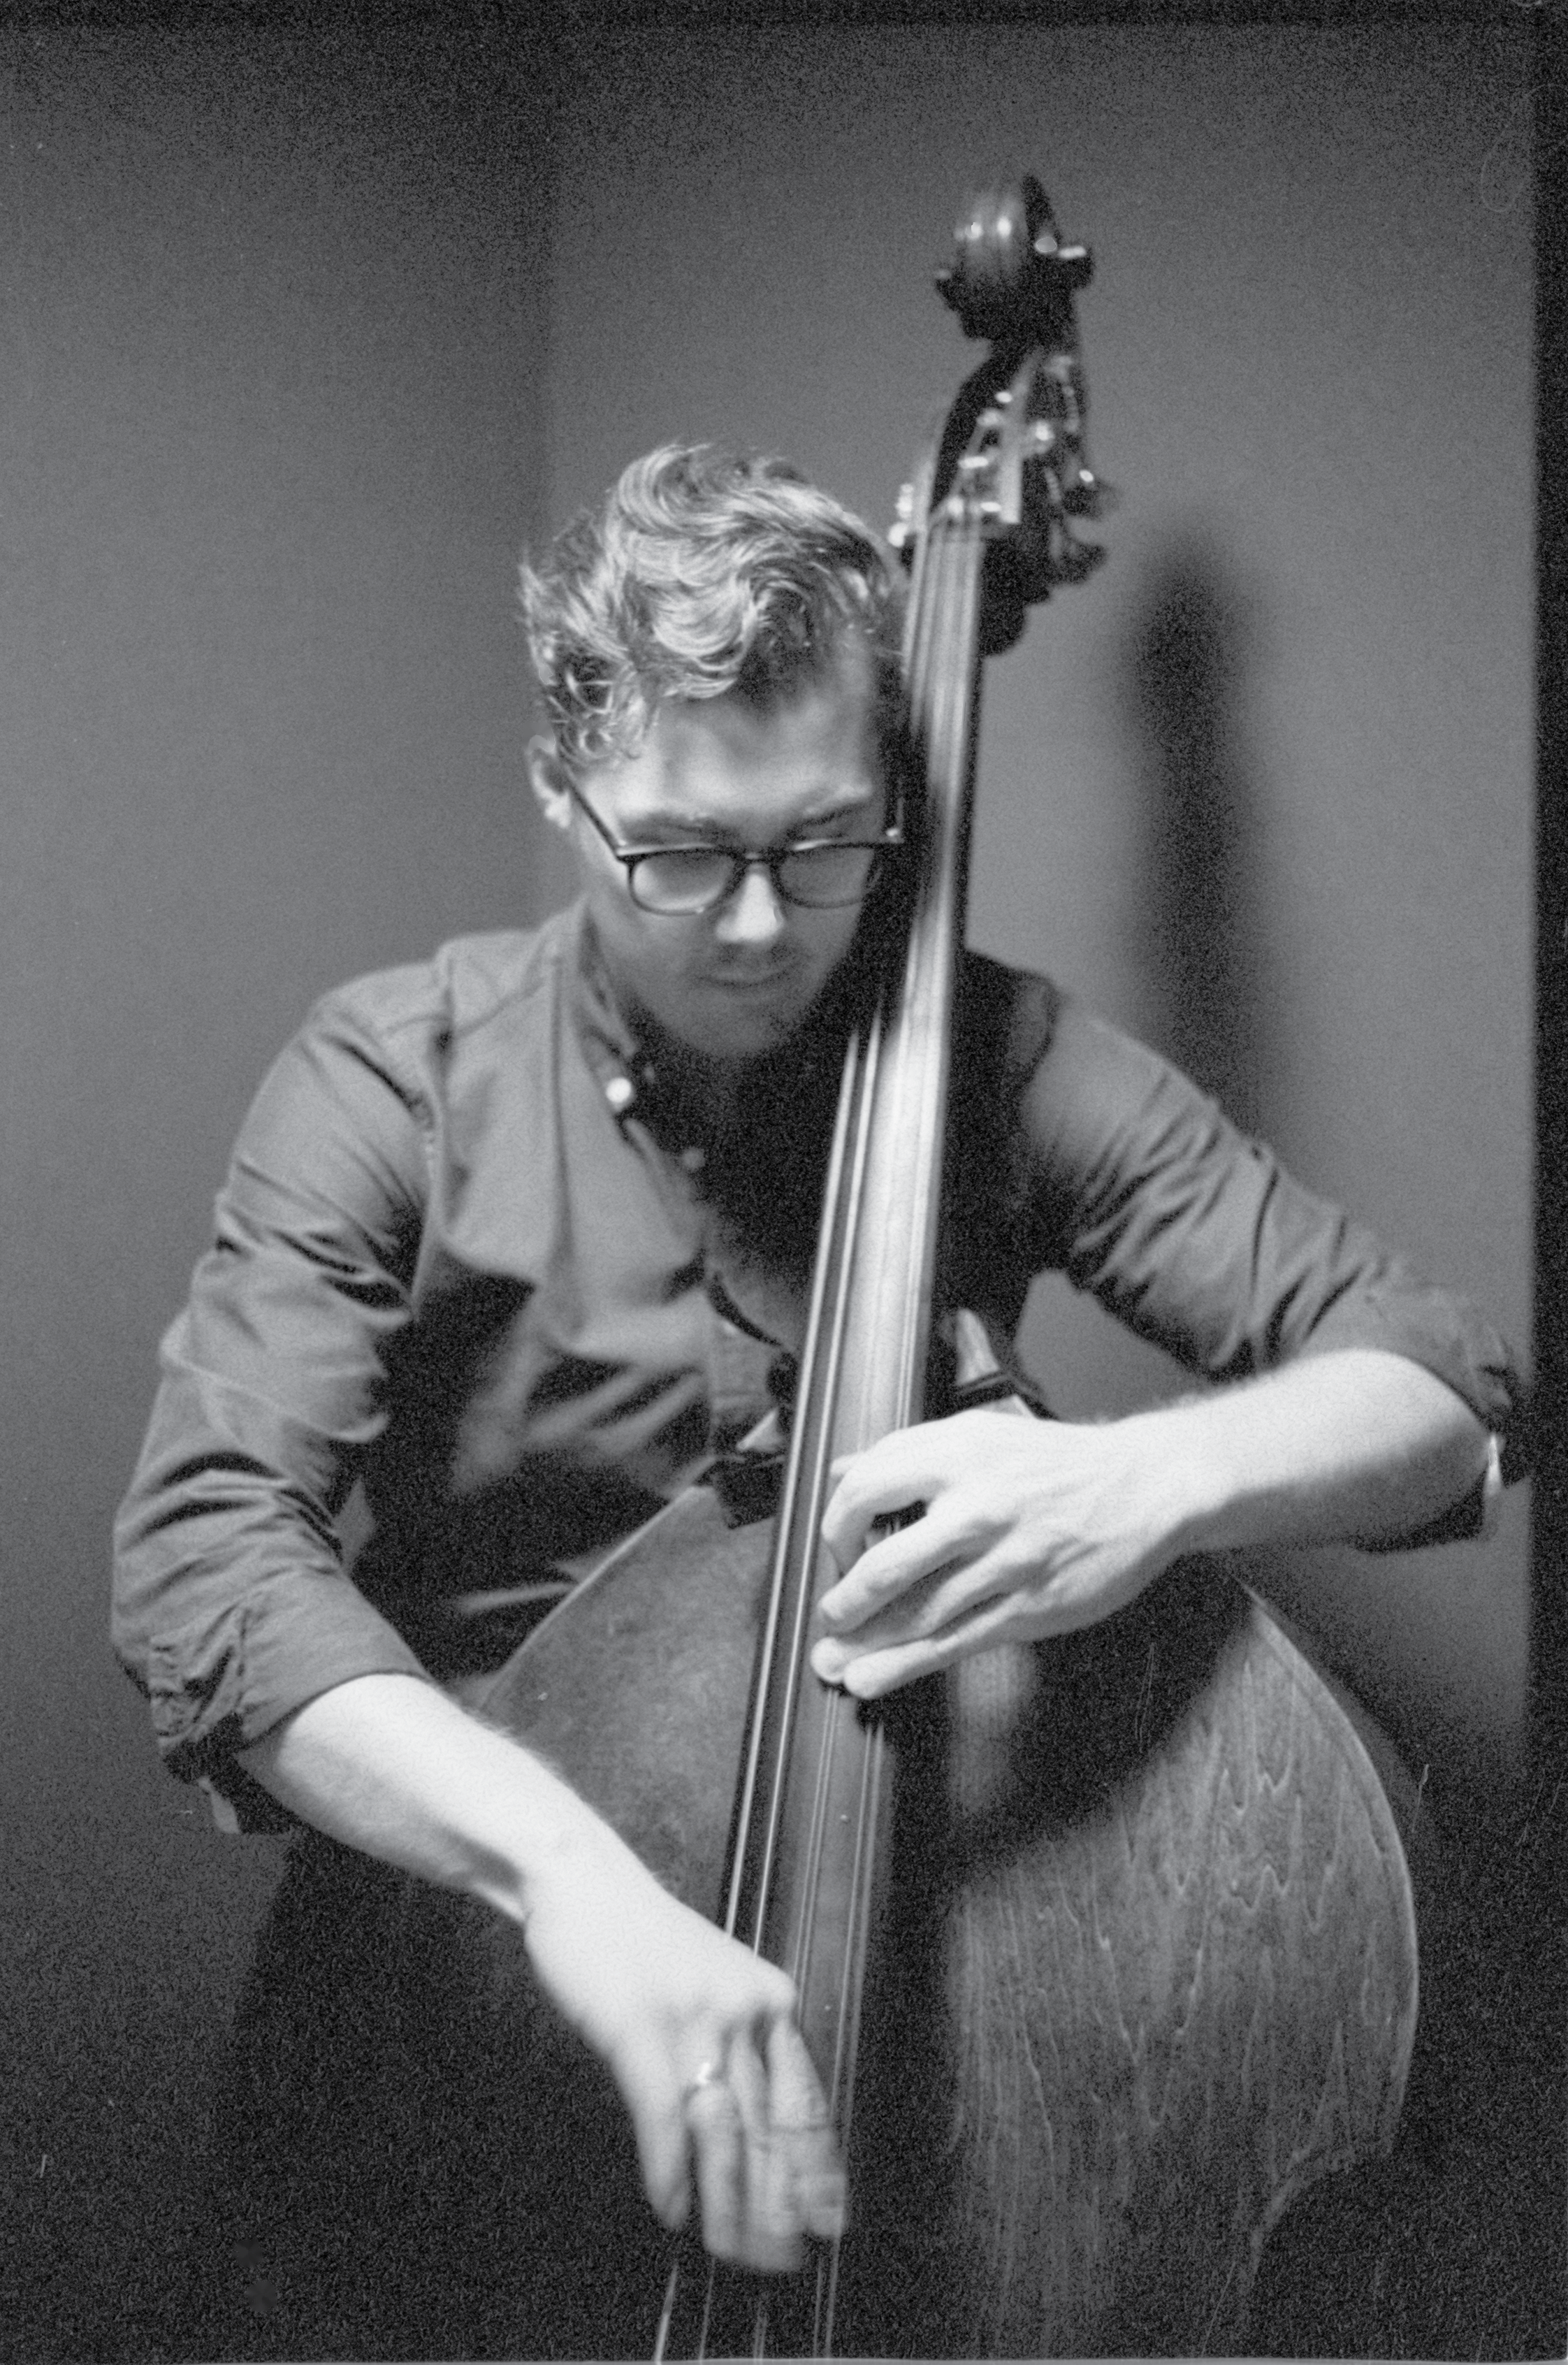 Black and white image of Alexander Svensen looking down as he plays the bass.